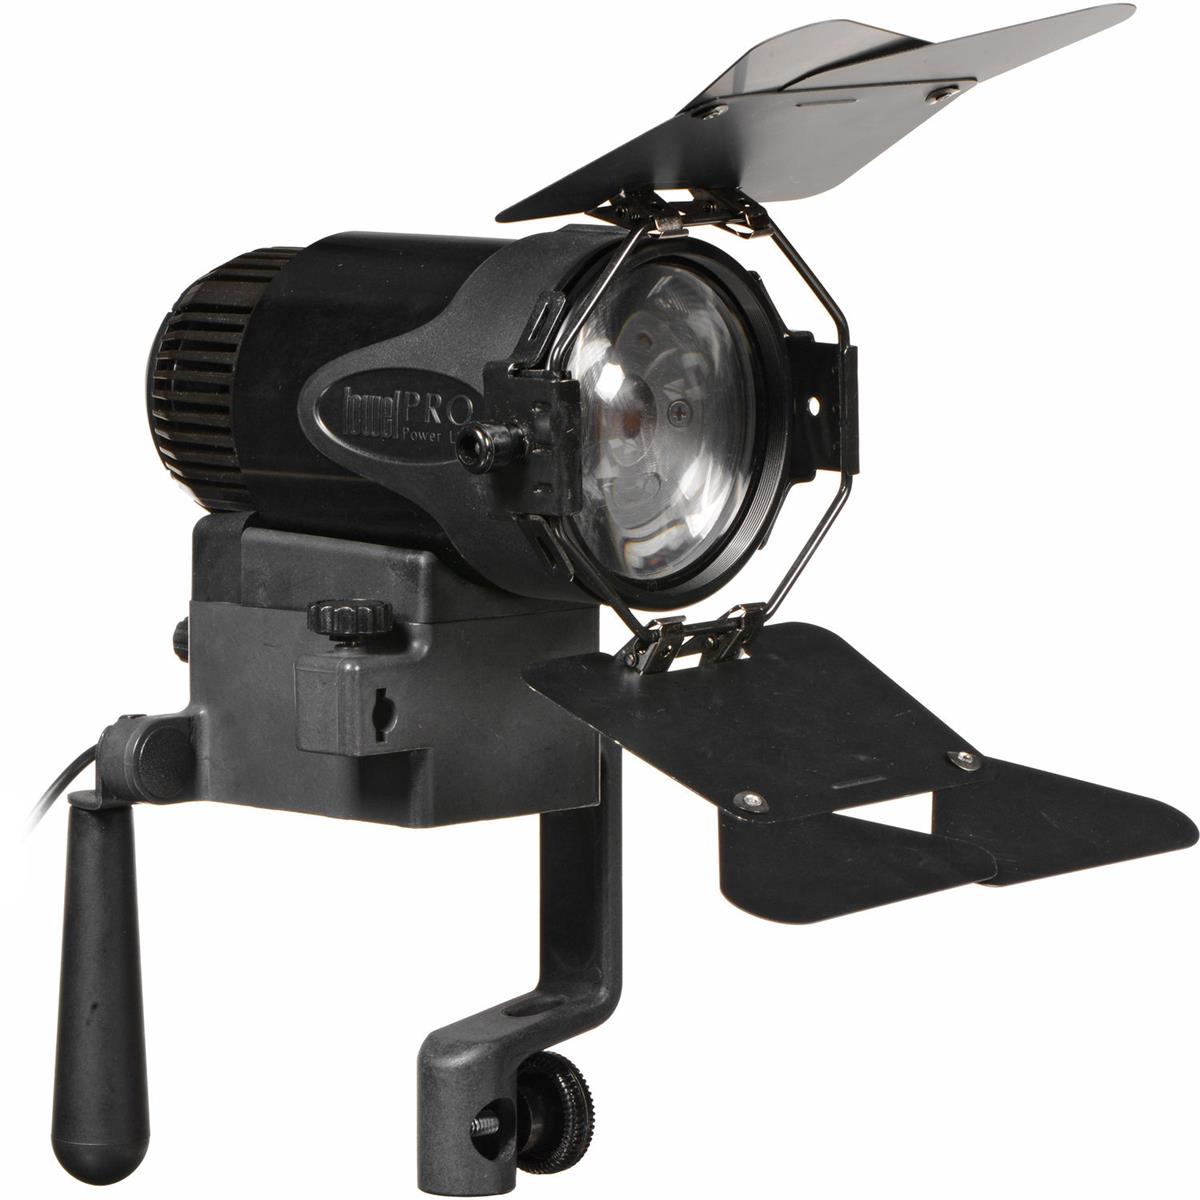 Image of Lowel Pro Power LED Daylight Head with AC Power Supply